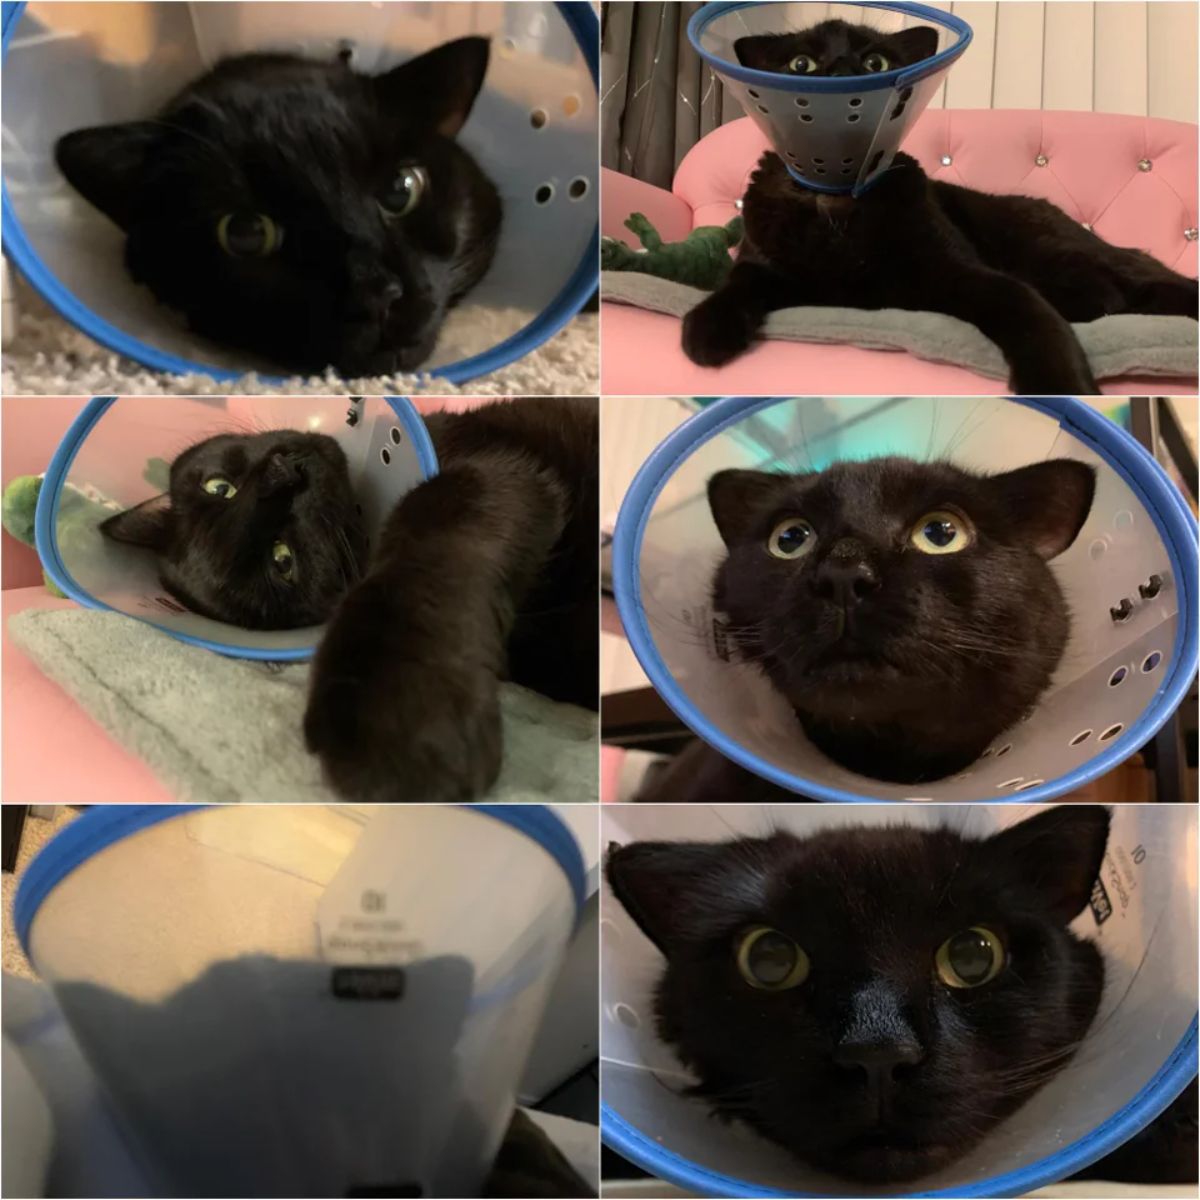 6 photos of a black cat in a transparent cone of shame